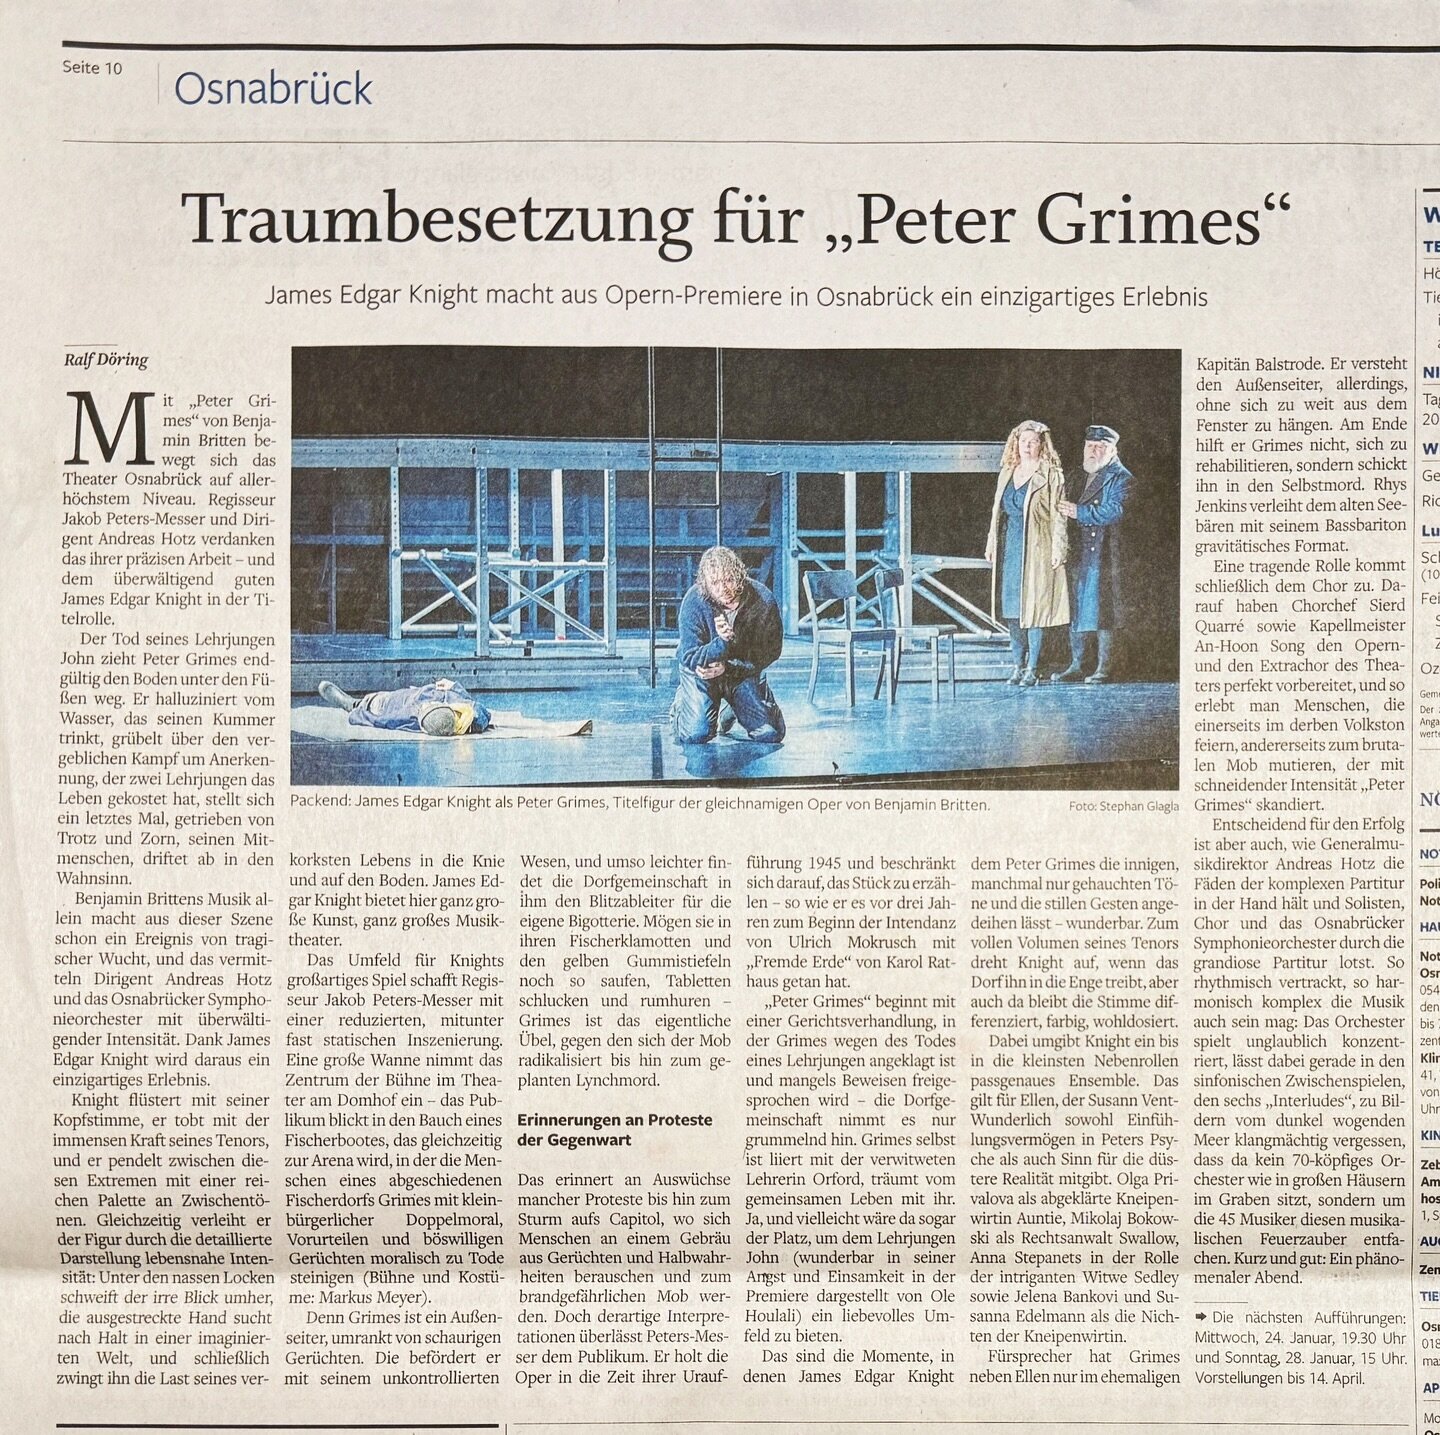 Extra! Extra! Read all about it! &bull; The first review of my debut as PETER GRIMES at Theater Osnabr&uuml;ck was published in the NOZ newspaper this morning &hellip; I&lsquo;m absolutely speechless! Thank you @noz_de for the wonderful write-up and 